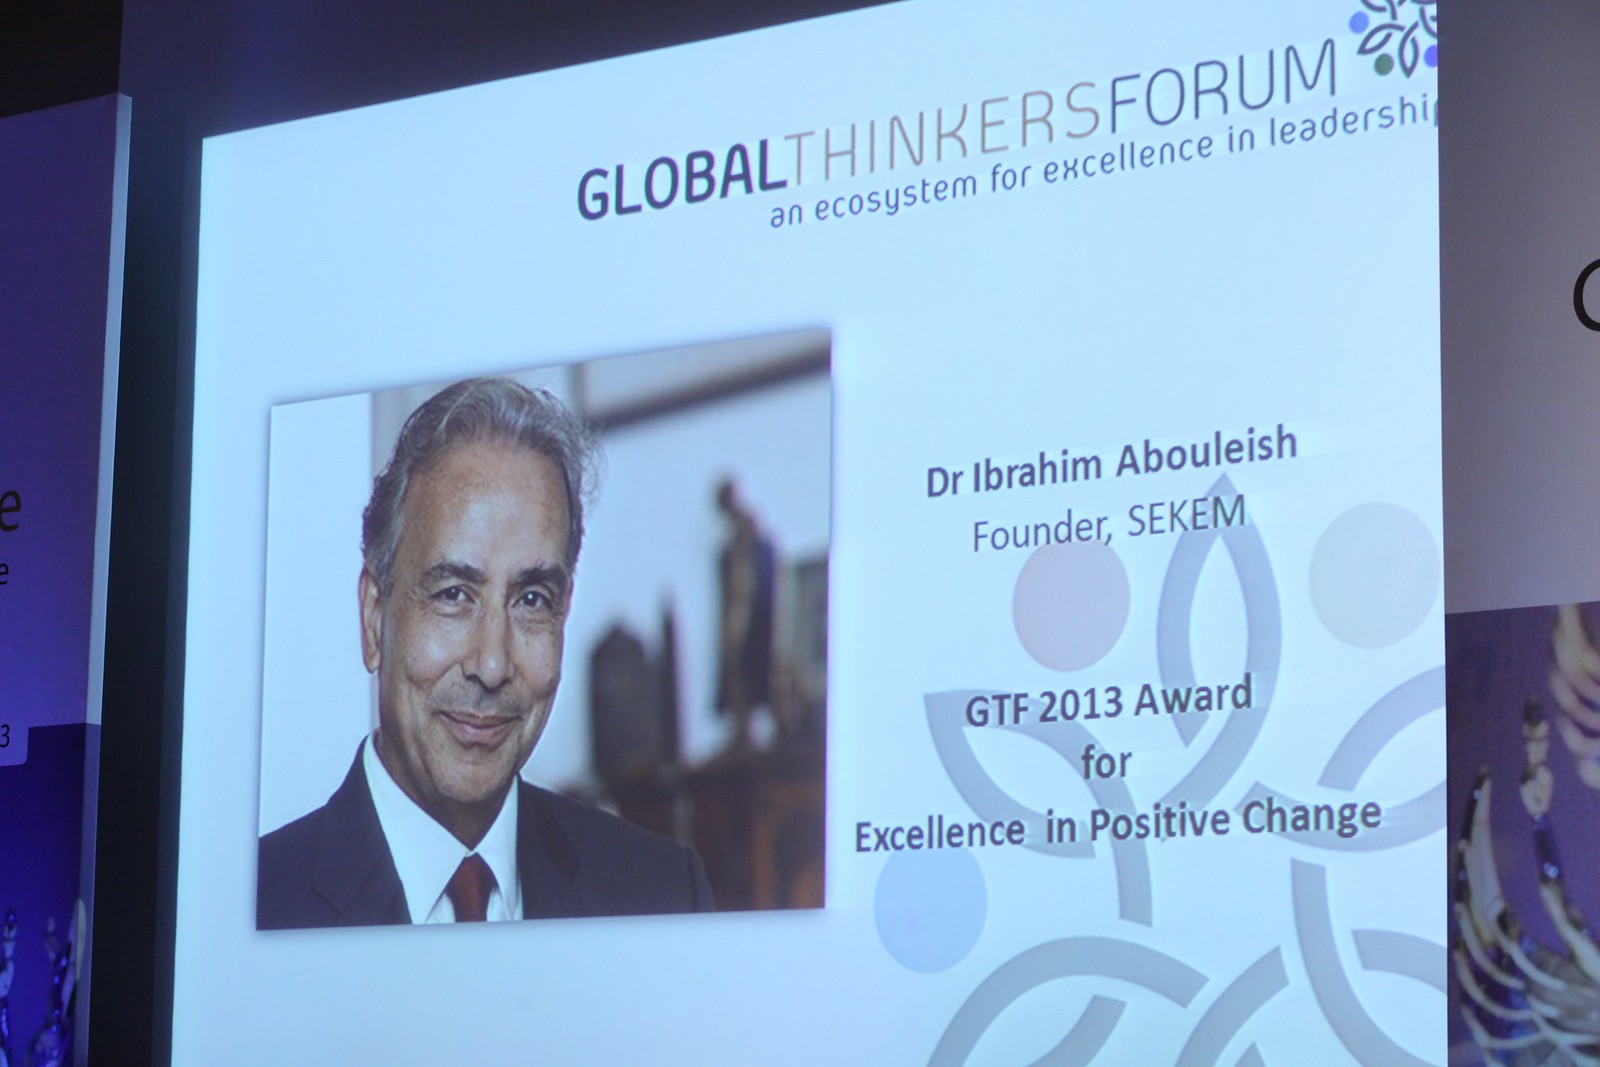 Dr Ibrahim Abouleish, GTF 2013 Award for Excellence in Positive Change